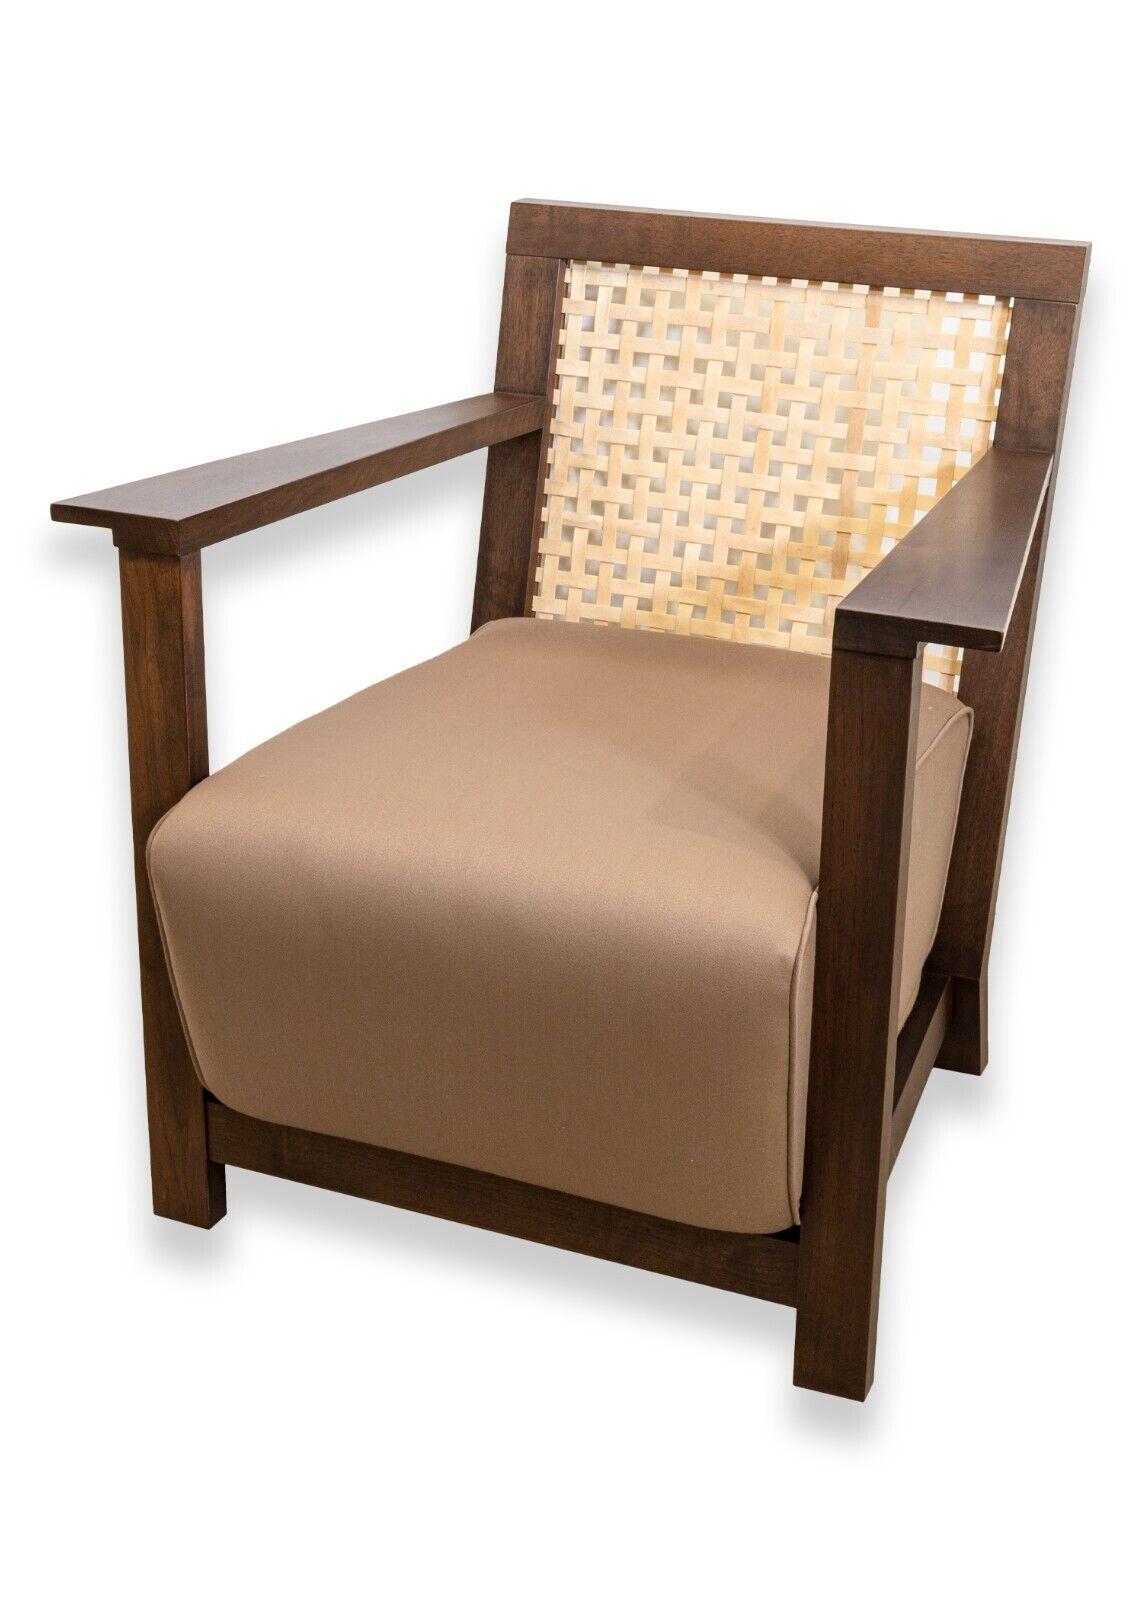 A pair of Baker contemporary cane back wood lounge chairs. This very handsome set of armchairs from Baker feature a wonderful rich, brown color, and a lovely mix of materials. They feature a dark wood frame construction with a lighter wood cane